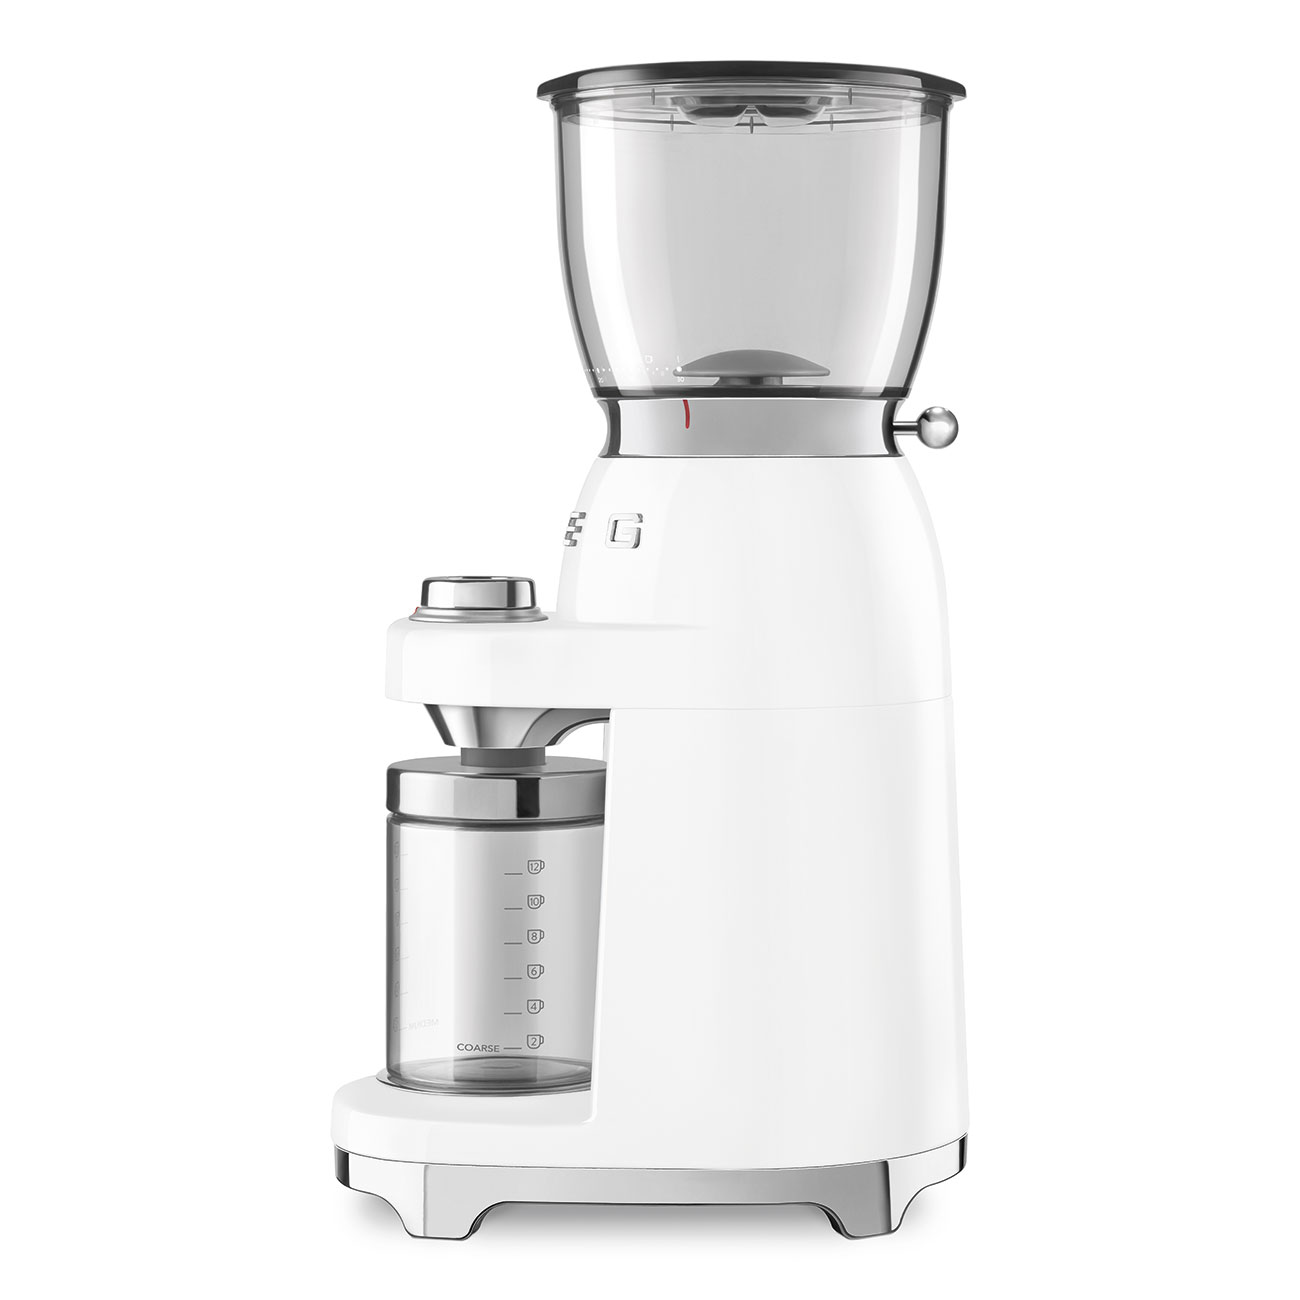 White Coffee Grinder featuring a conical burr - CGF01WHUK - Smeg_2